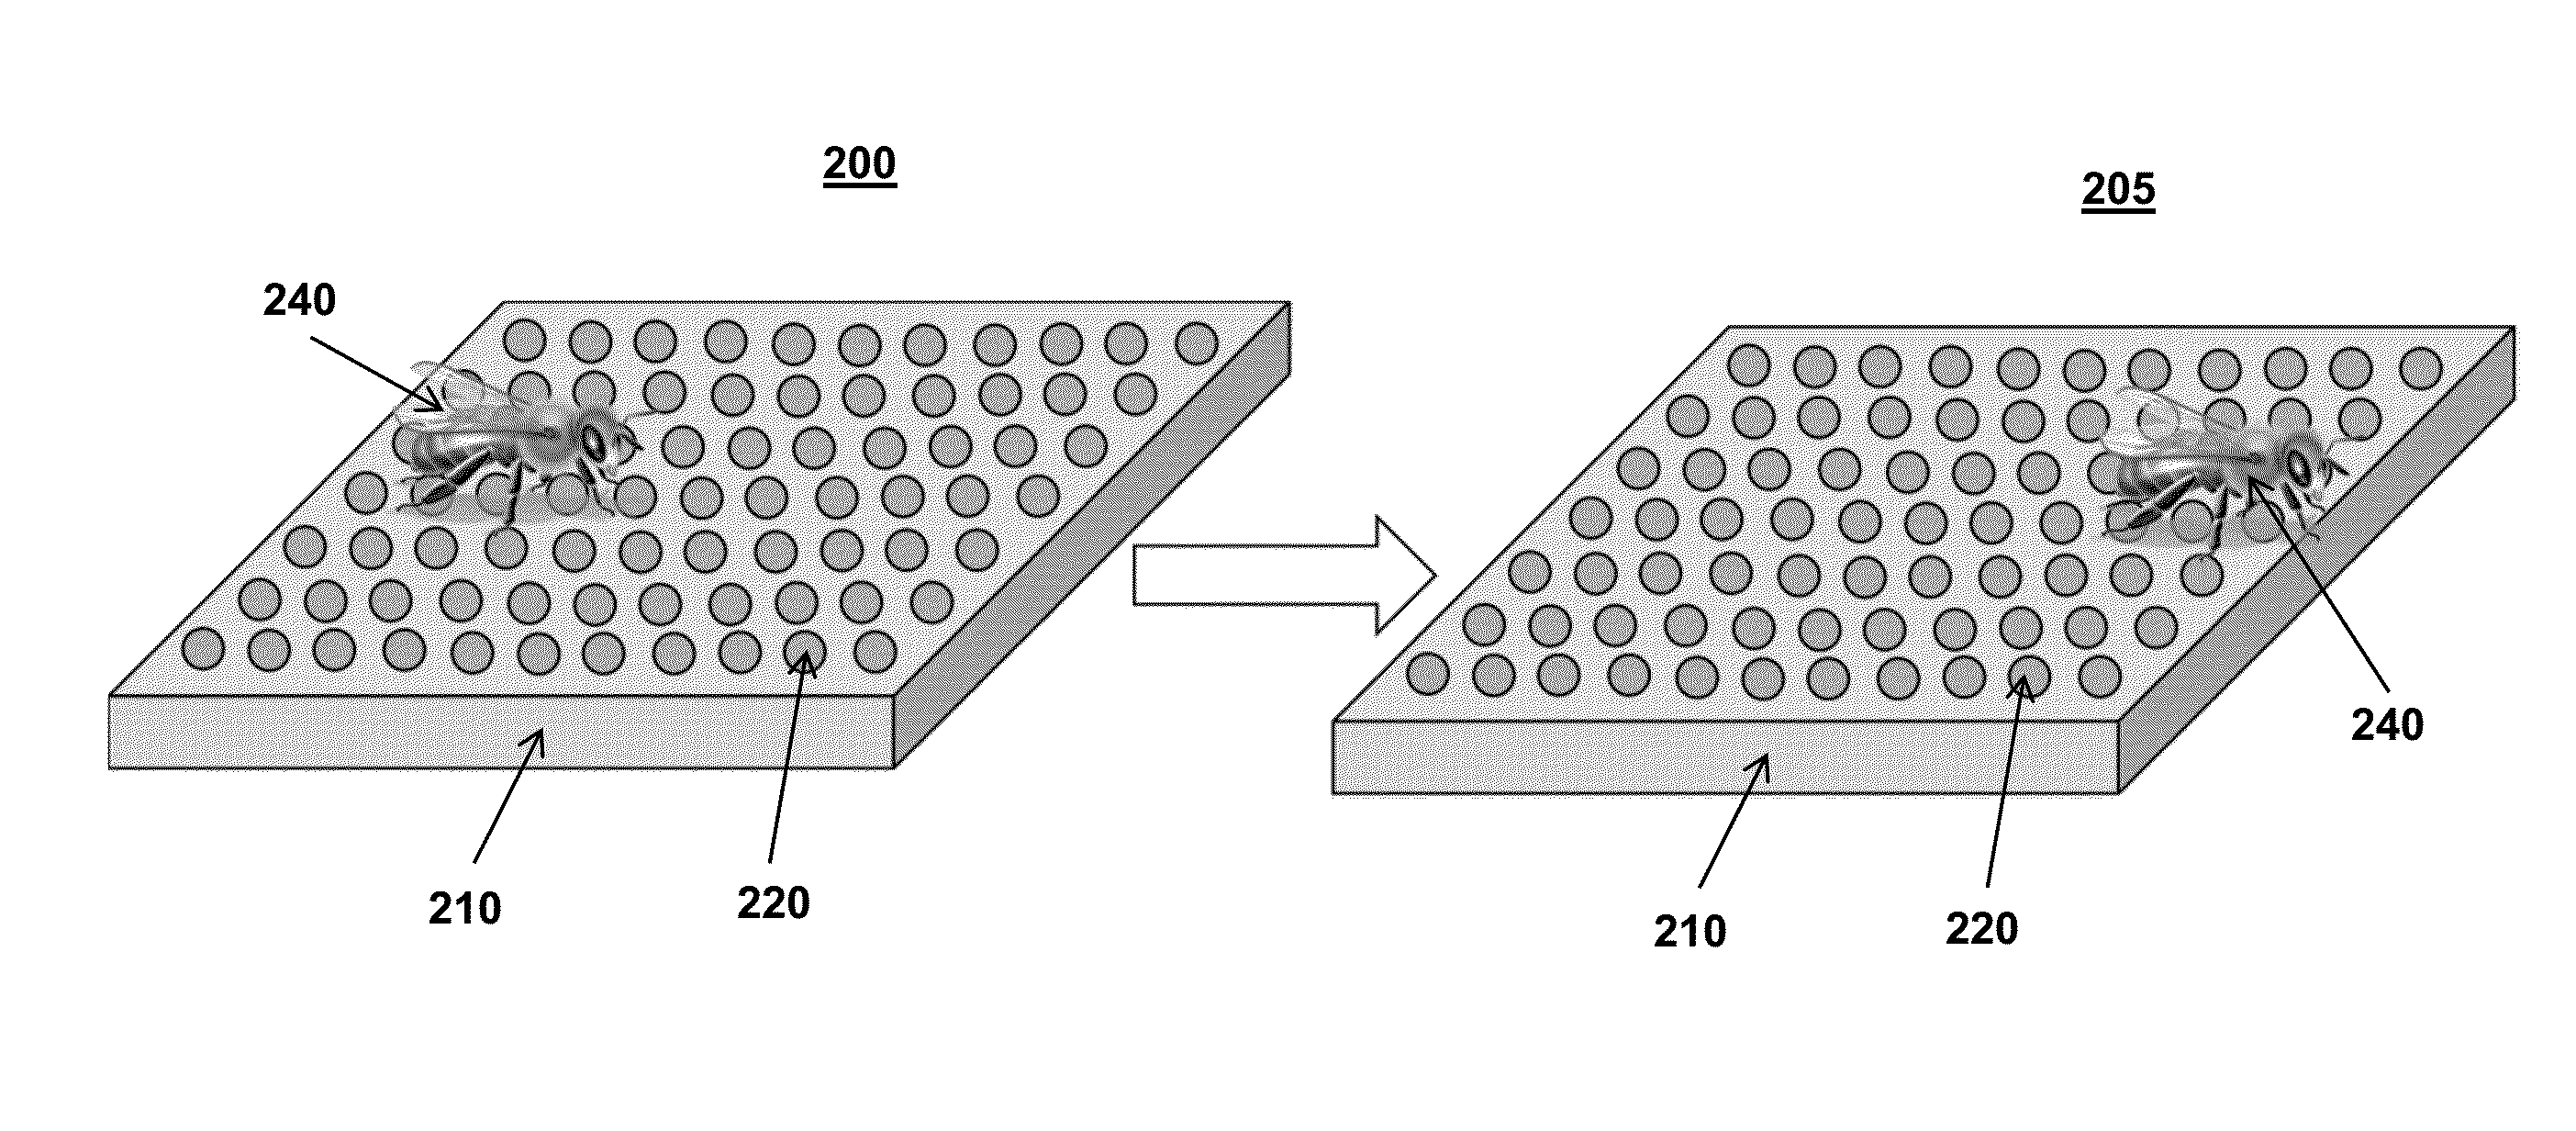 Segmented copolymer compositions and coatings incorporating these compositions